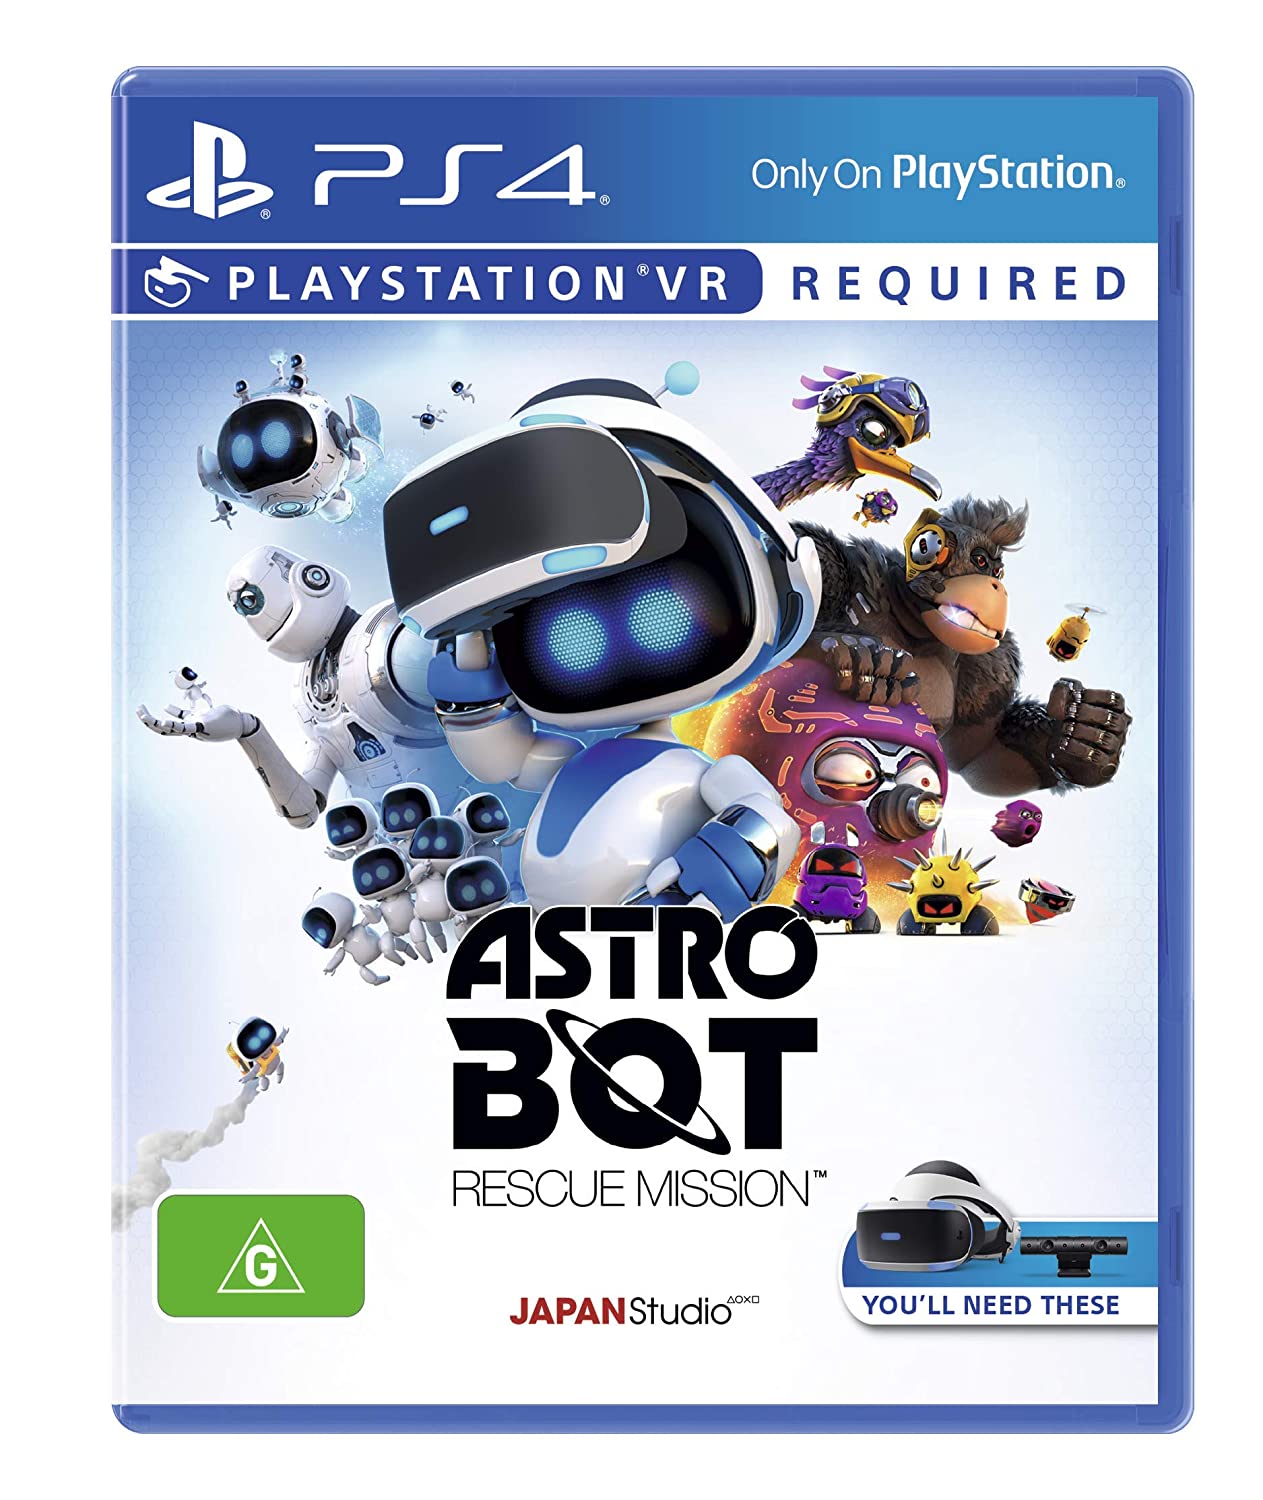 Astro Bot Rescue Mission Playstation VR: Video Games